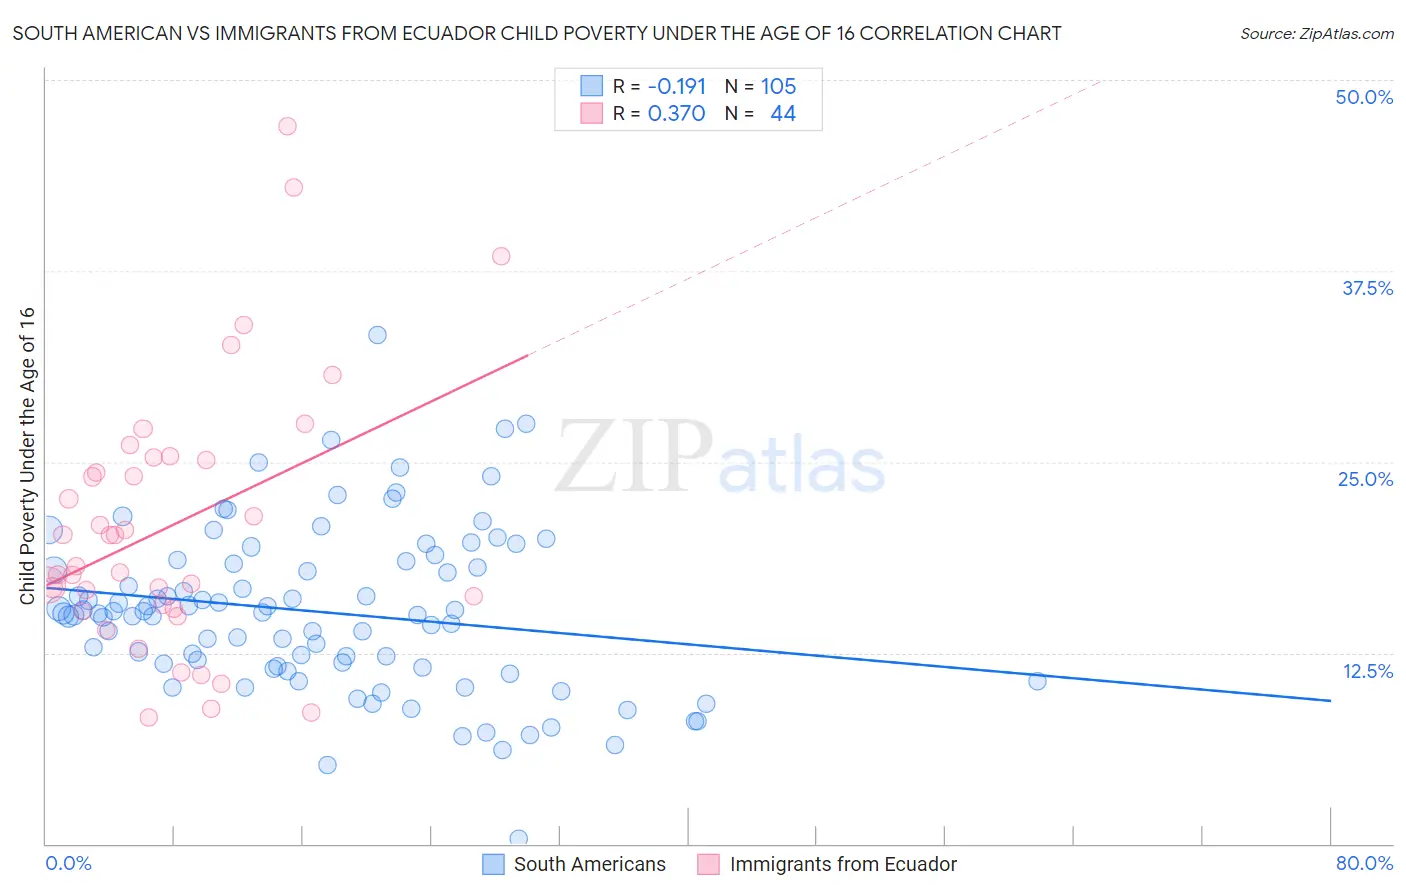 South American vs Immigrants from Ecuador Child Poverty Under the Age of 16